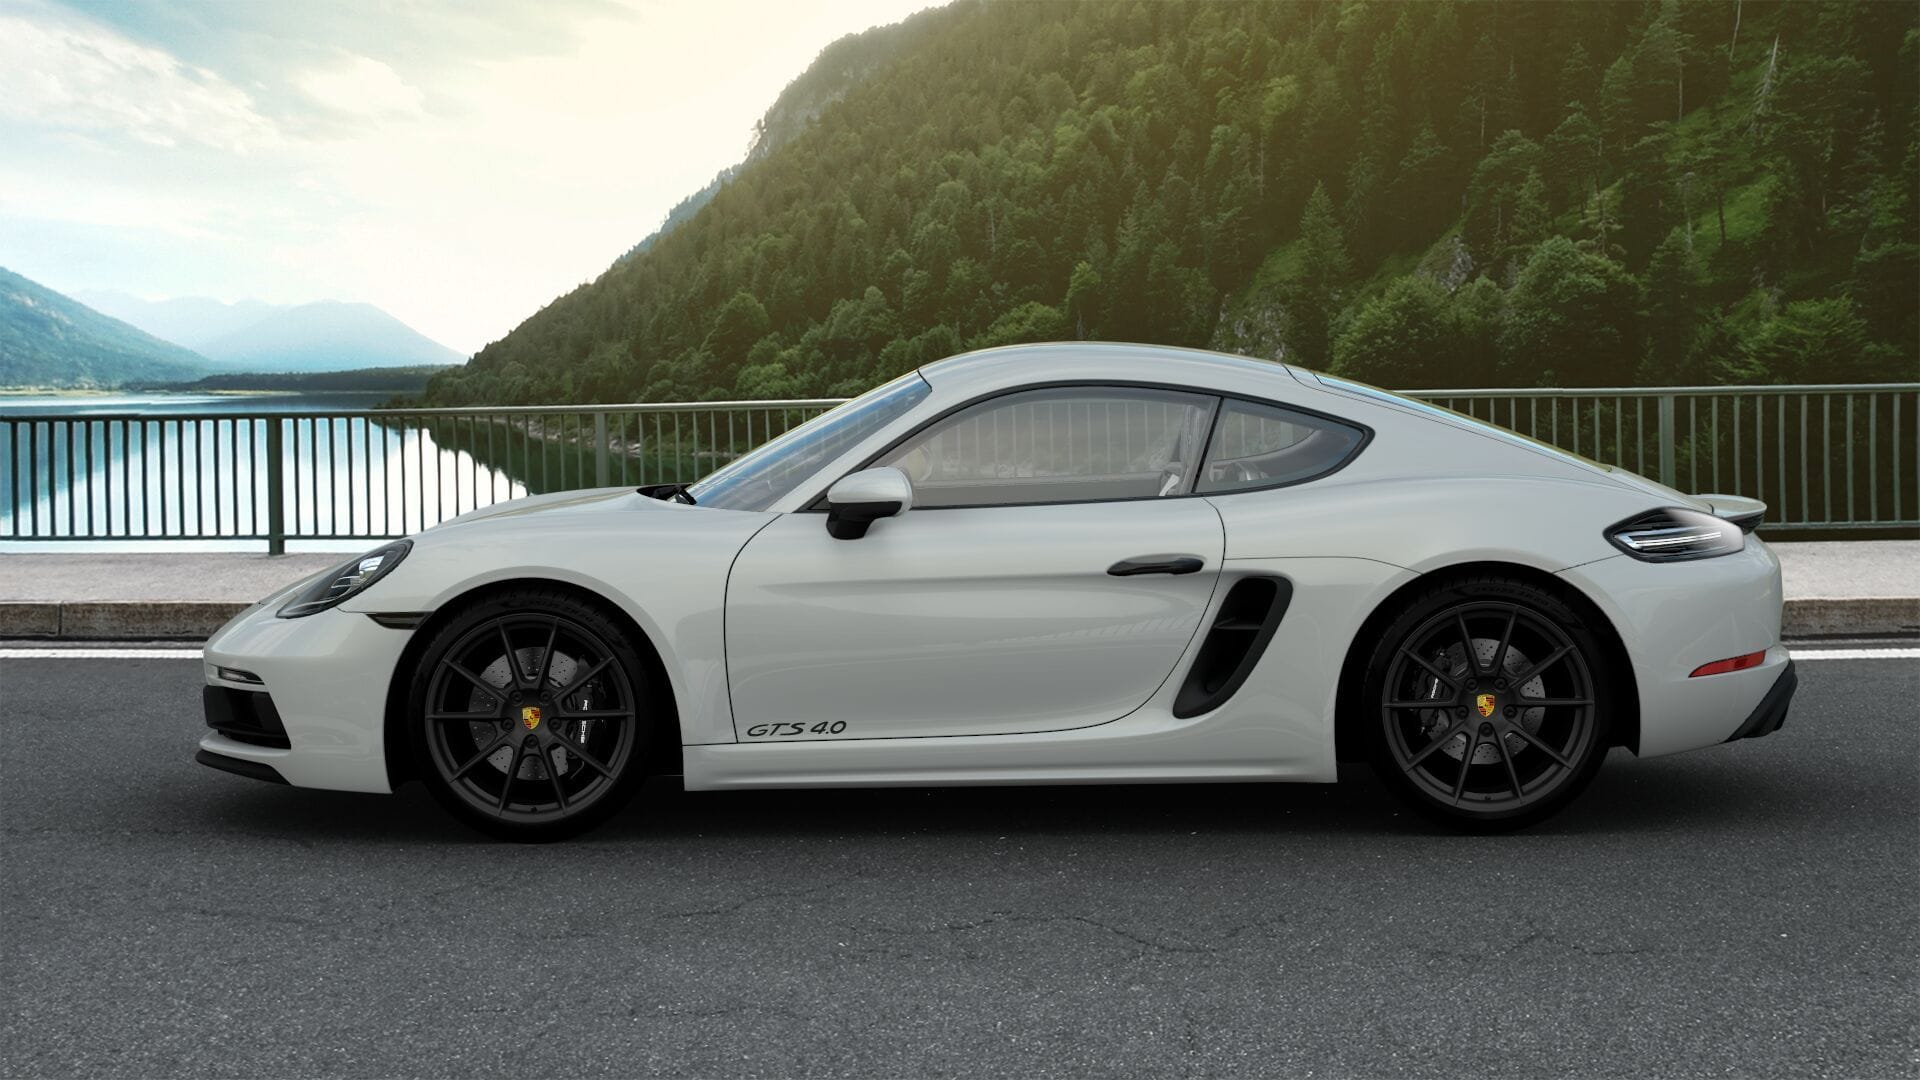 718 Gts 4 0 Full Bucket Seats Yay Or Nay Rennlist Porsche Discussion Forums